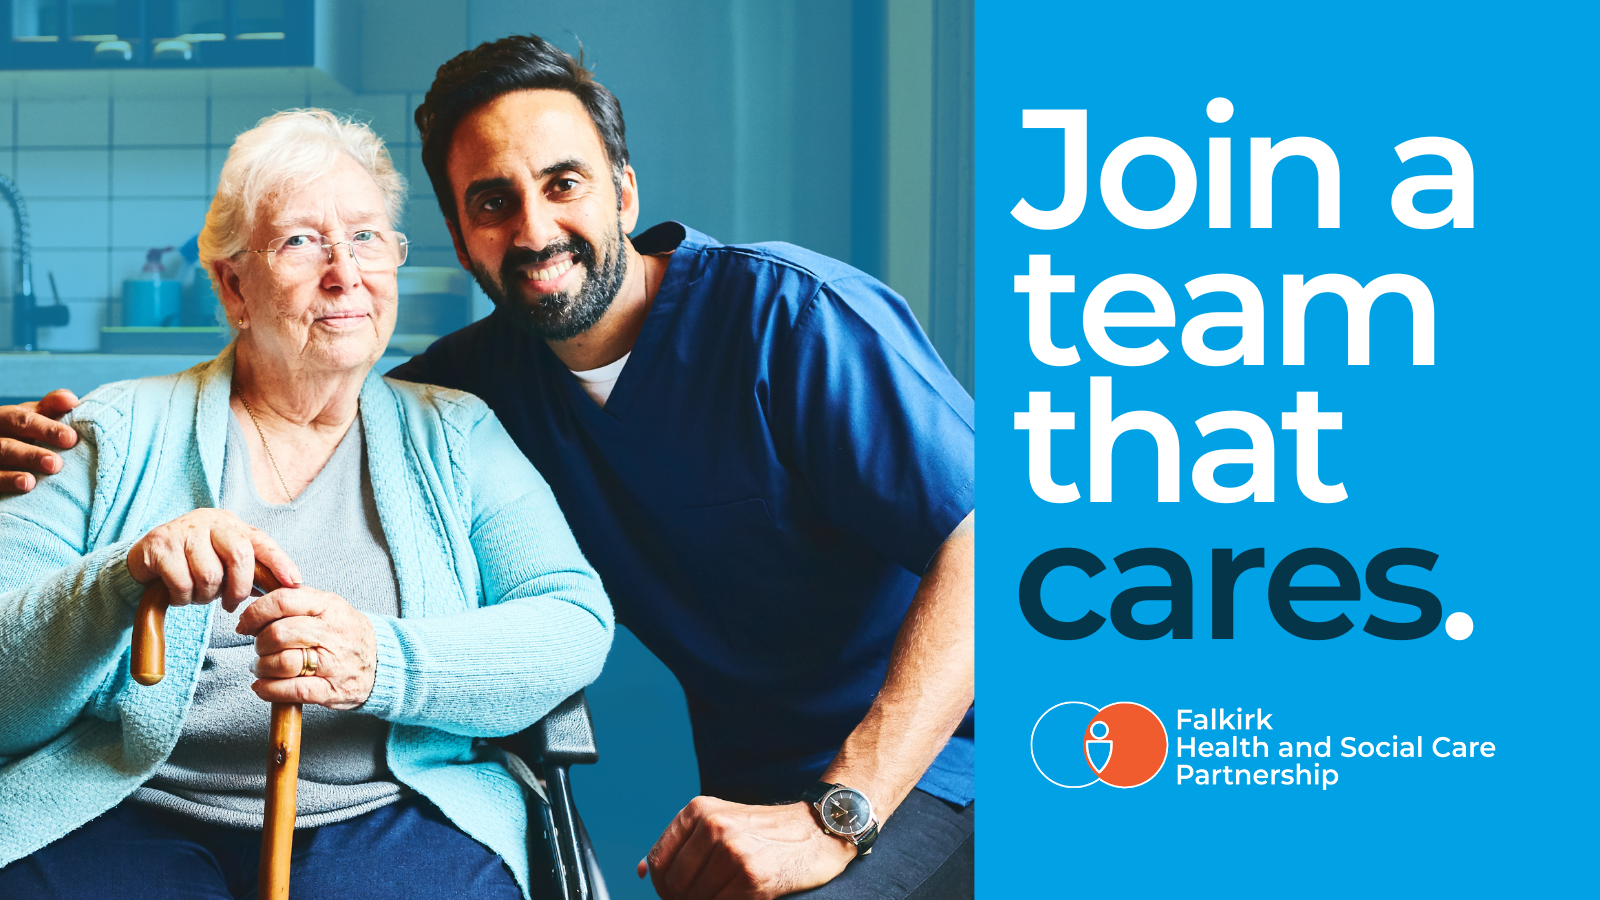 Join a team that cares graphic with man holding arm around shoulder of elderly person.